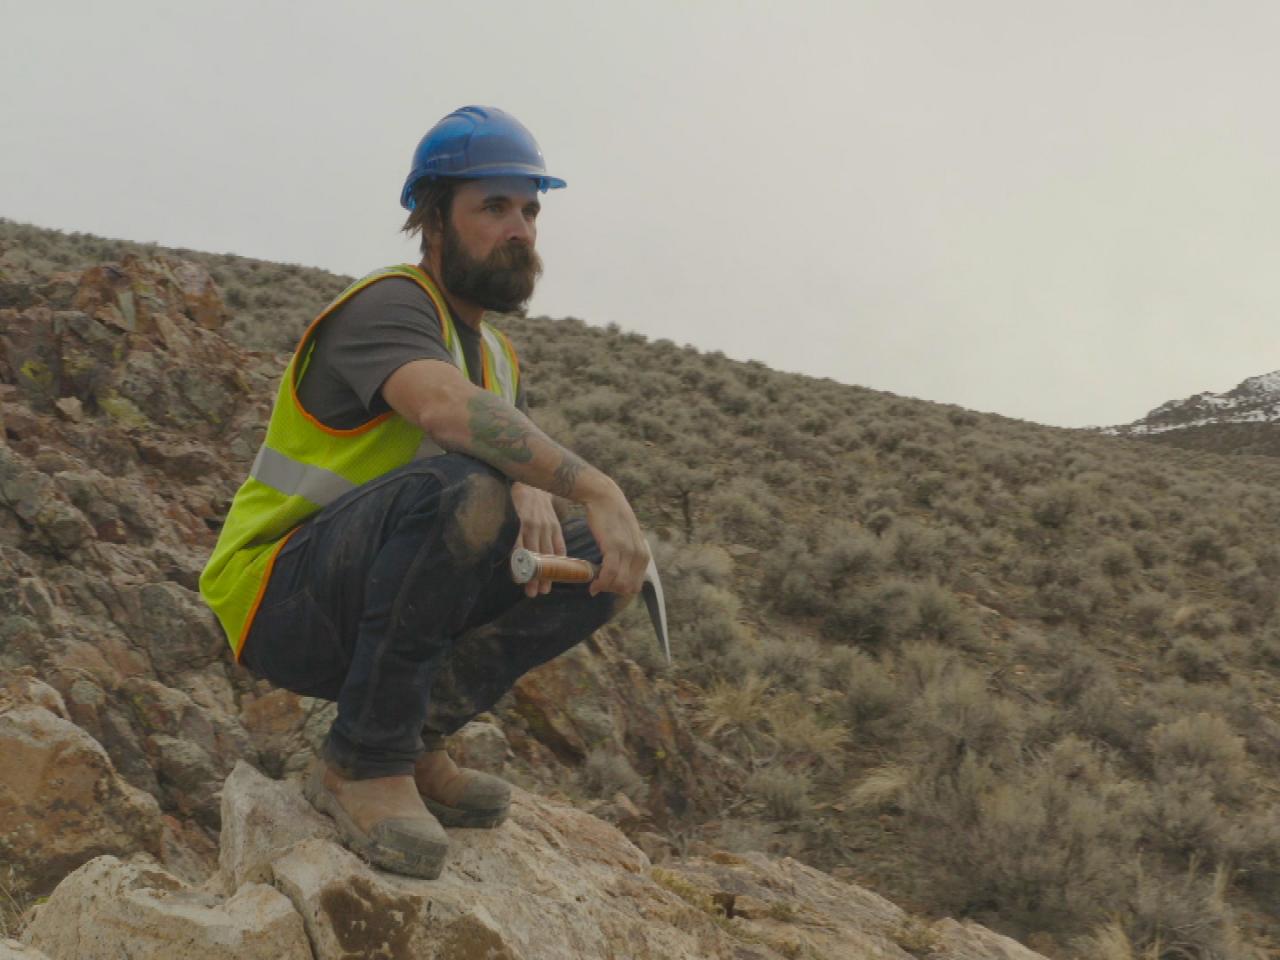 Discovery's #1-Rated Show “Gold Rush” Returns as the Miners Battle